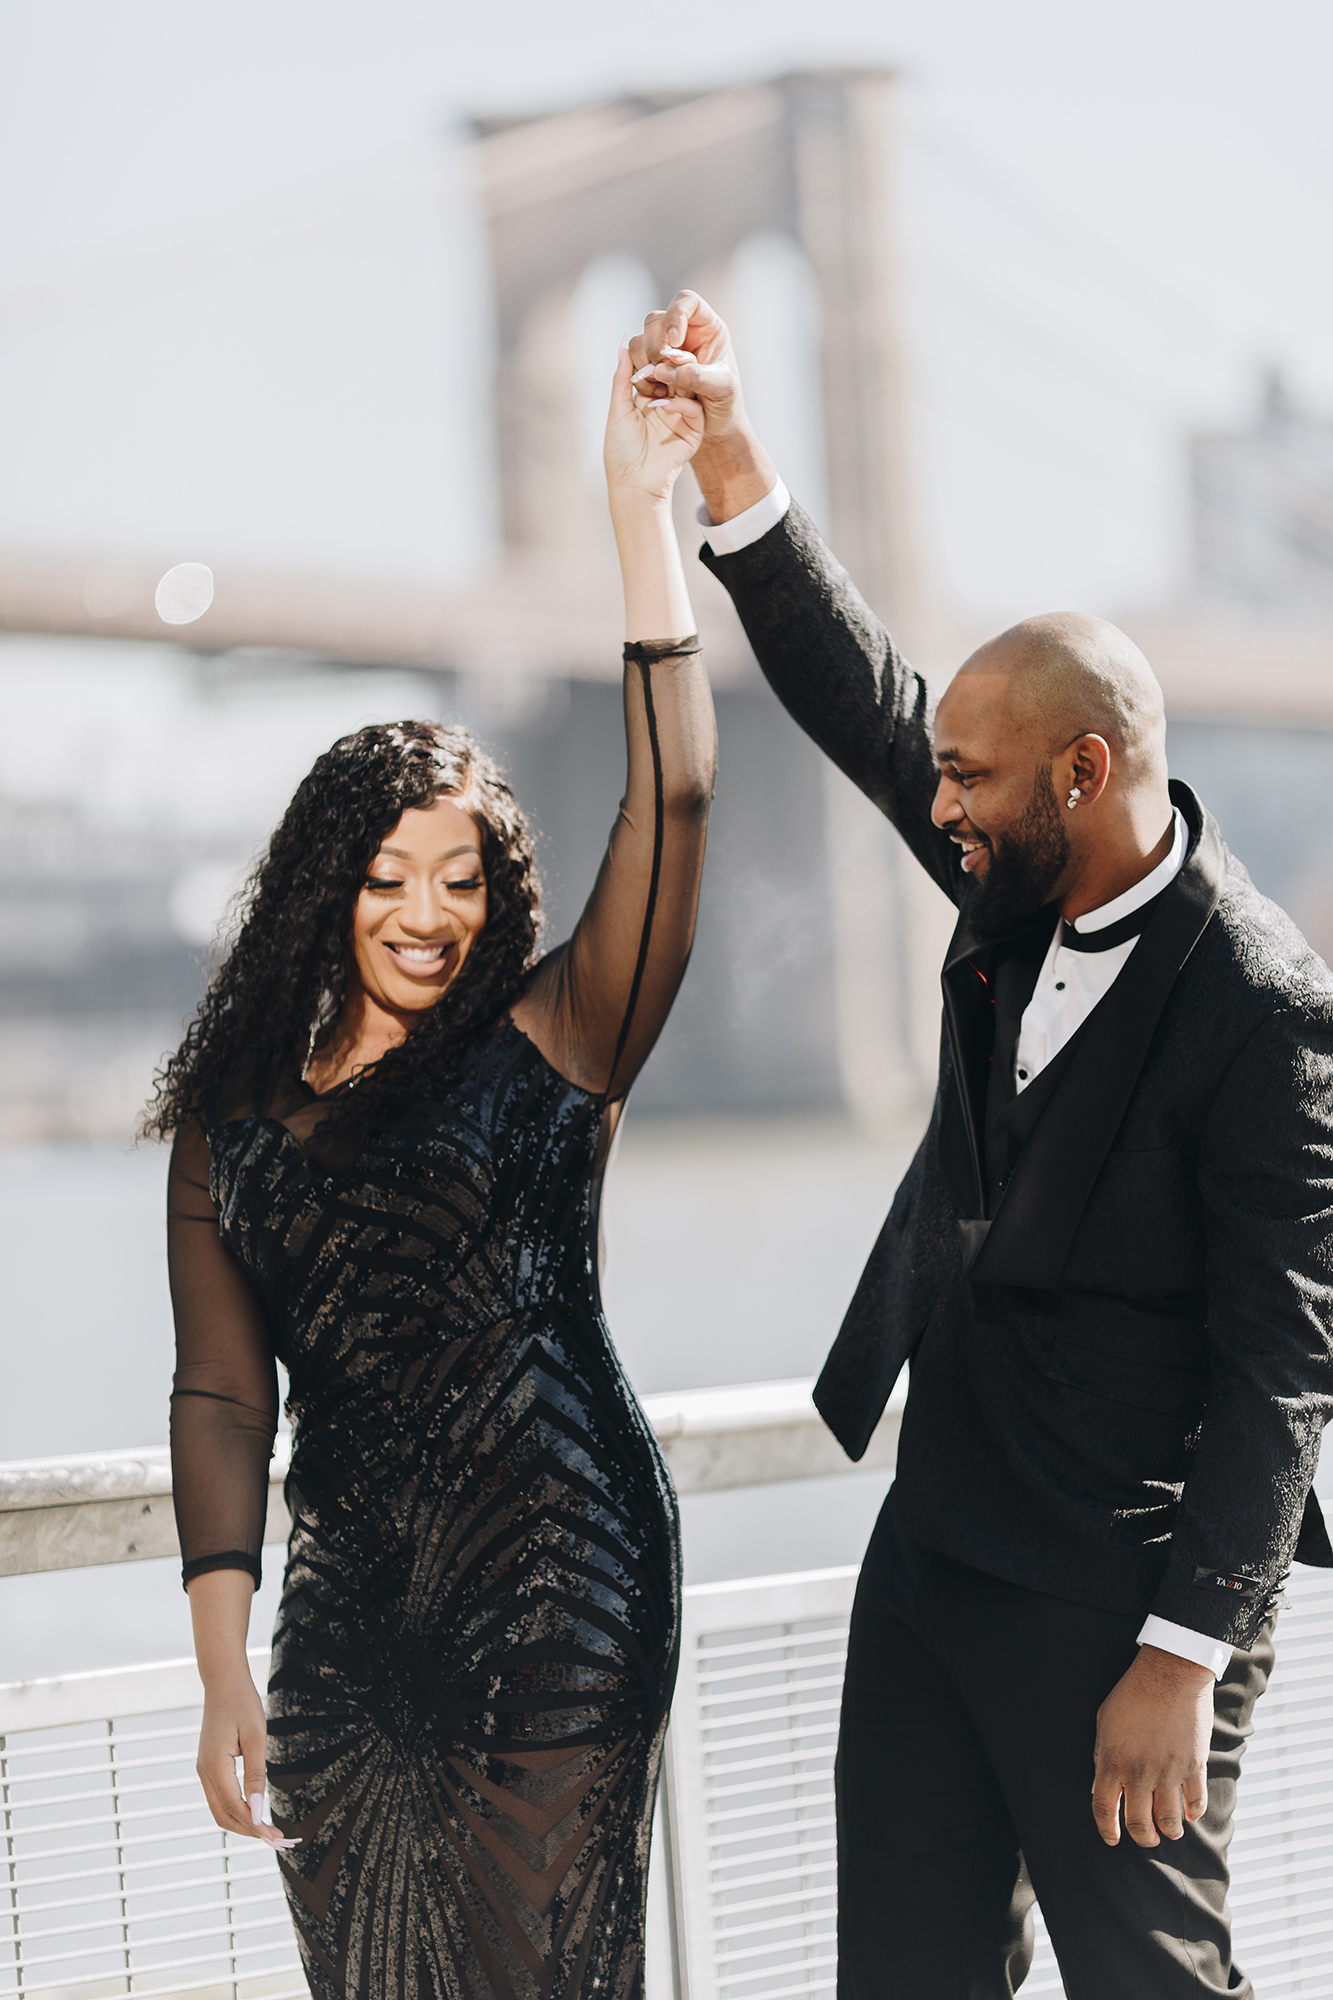 Lively Wintery South Street Seaport Engagement Photography